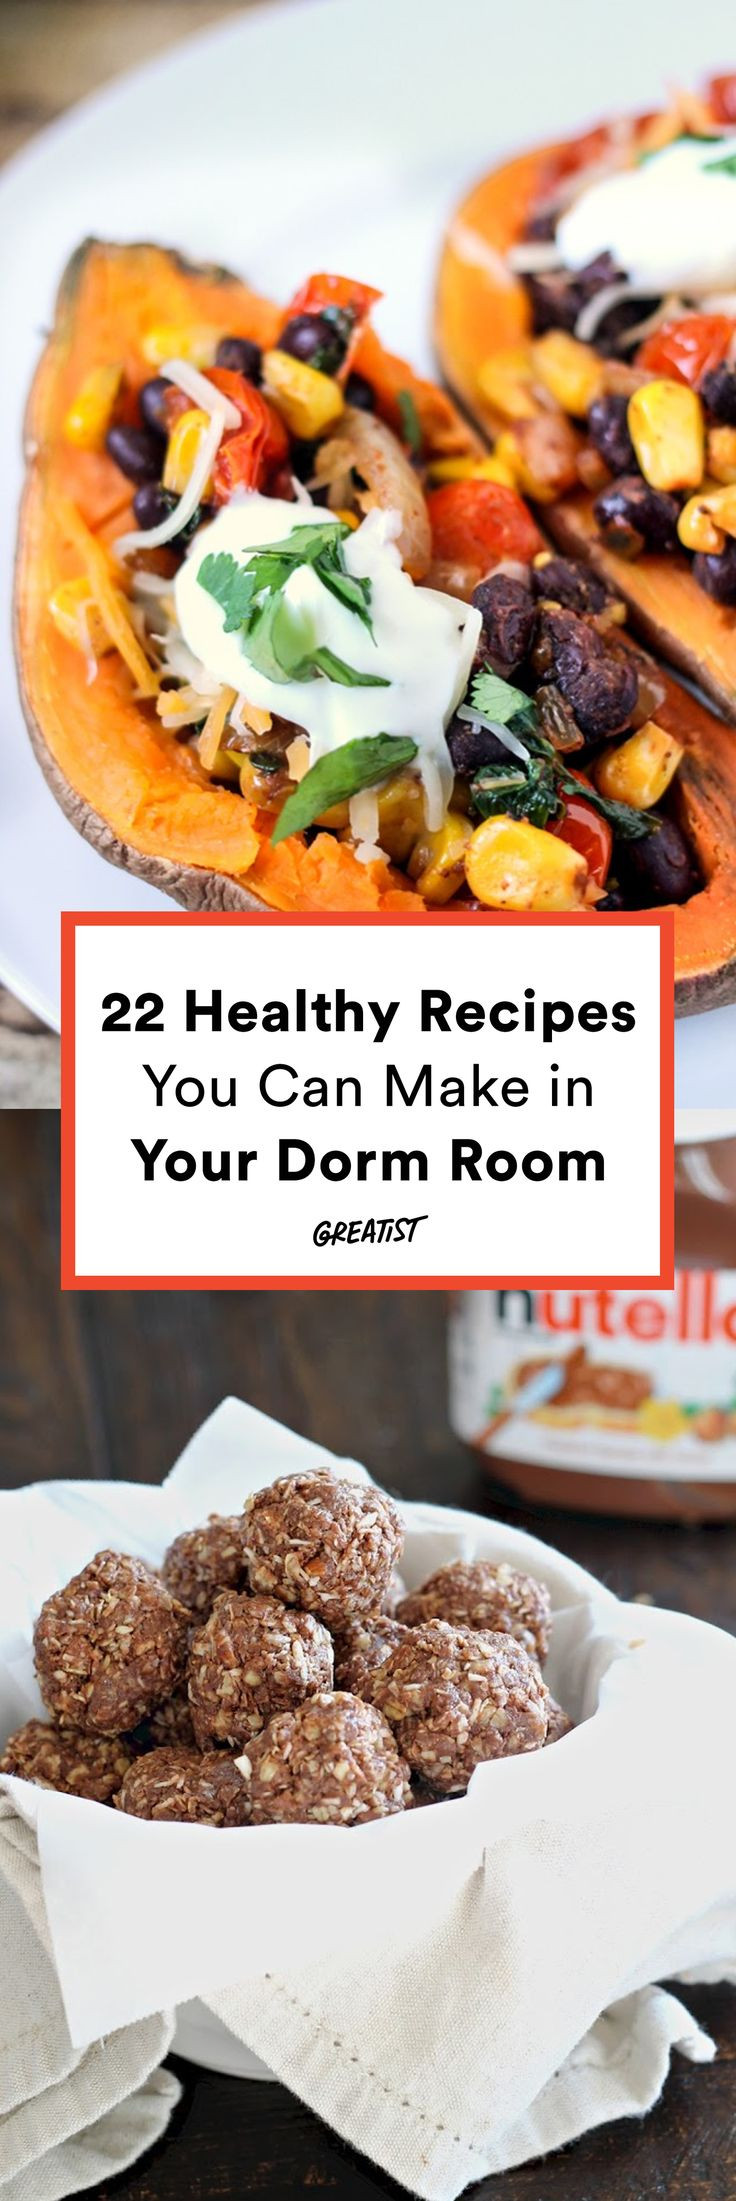 Healthy College Snacks
 22 Healthy College Recipes You Can Make in Your Dorm Room